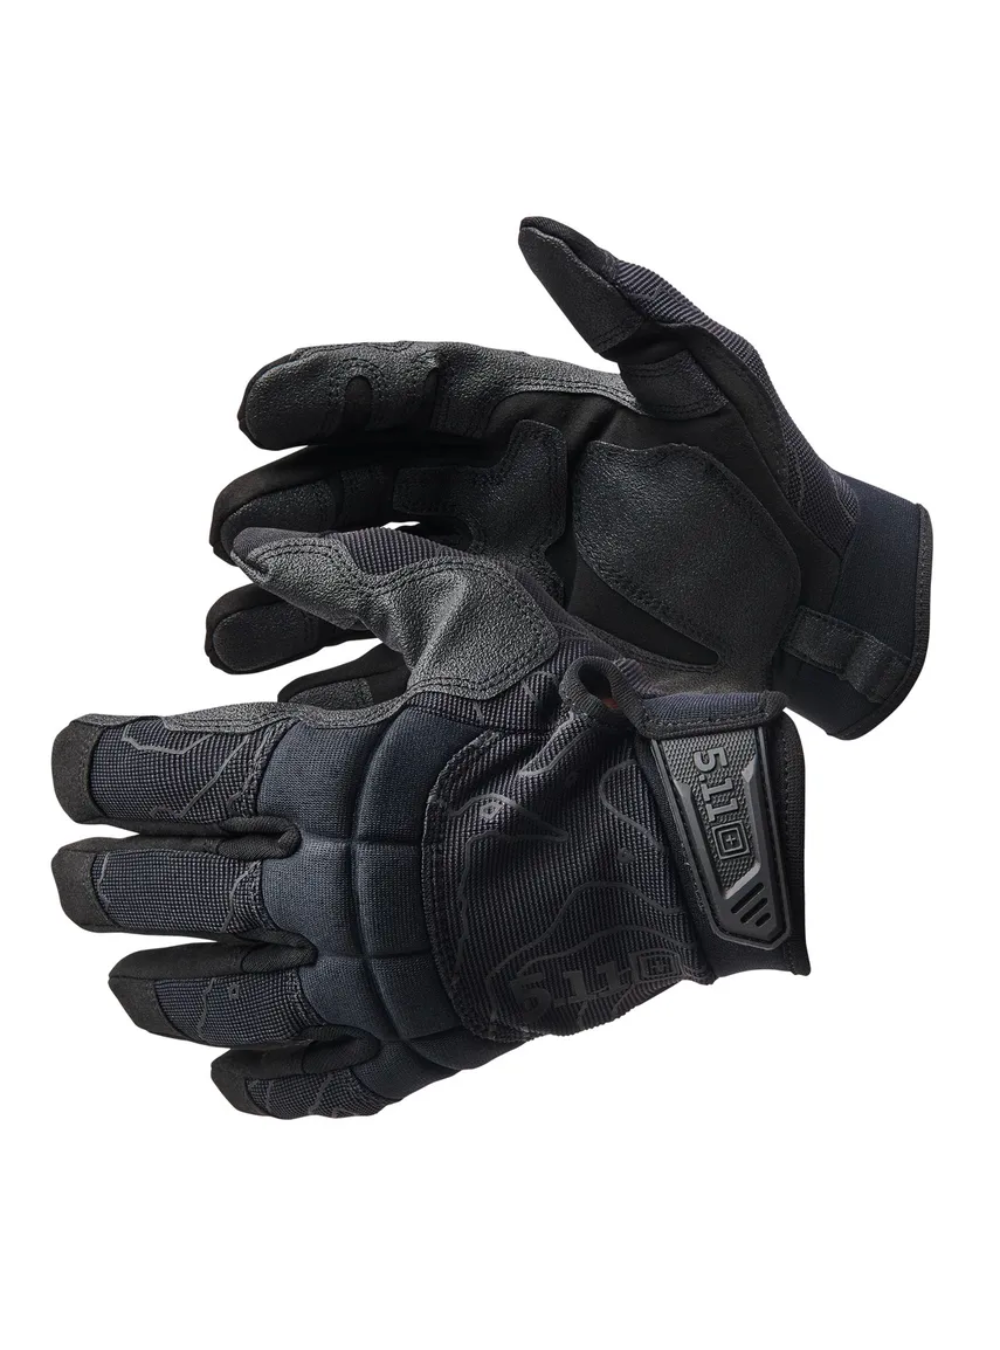 5.11 Tactical Station Grip 3.0 Glove